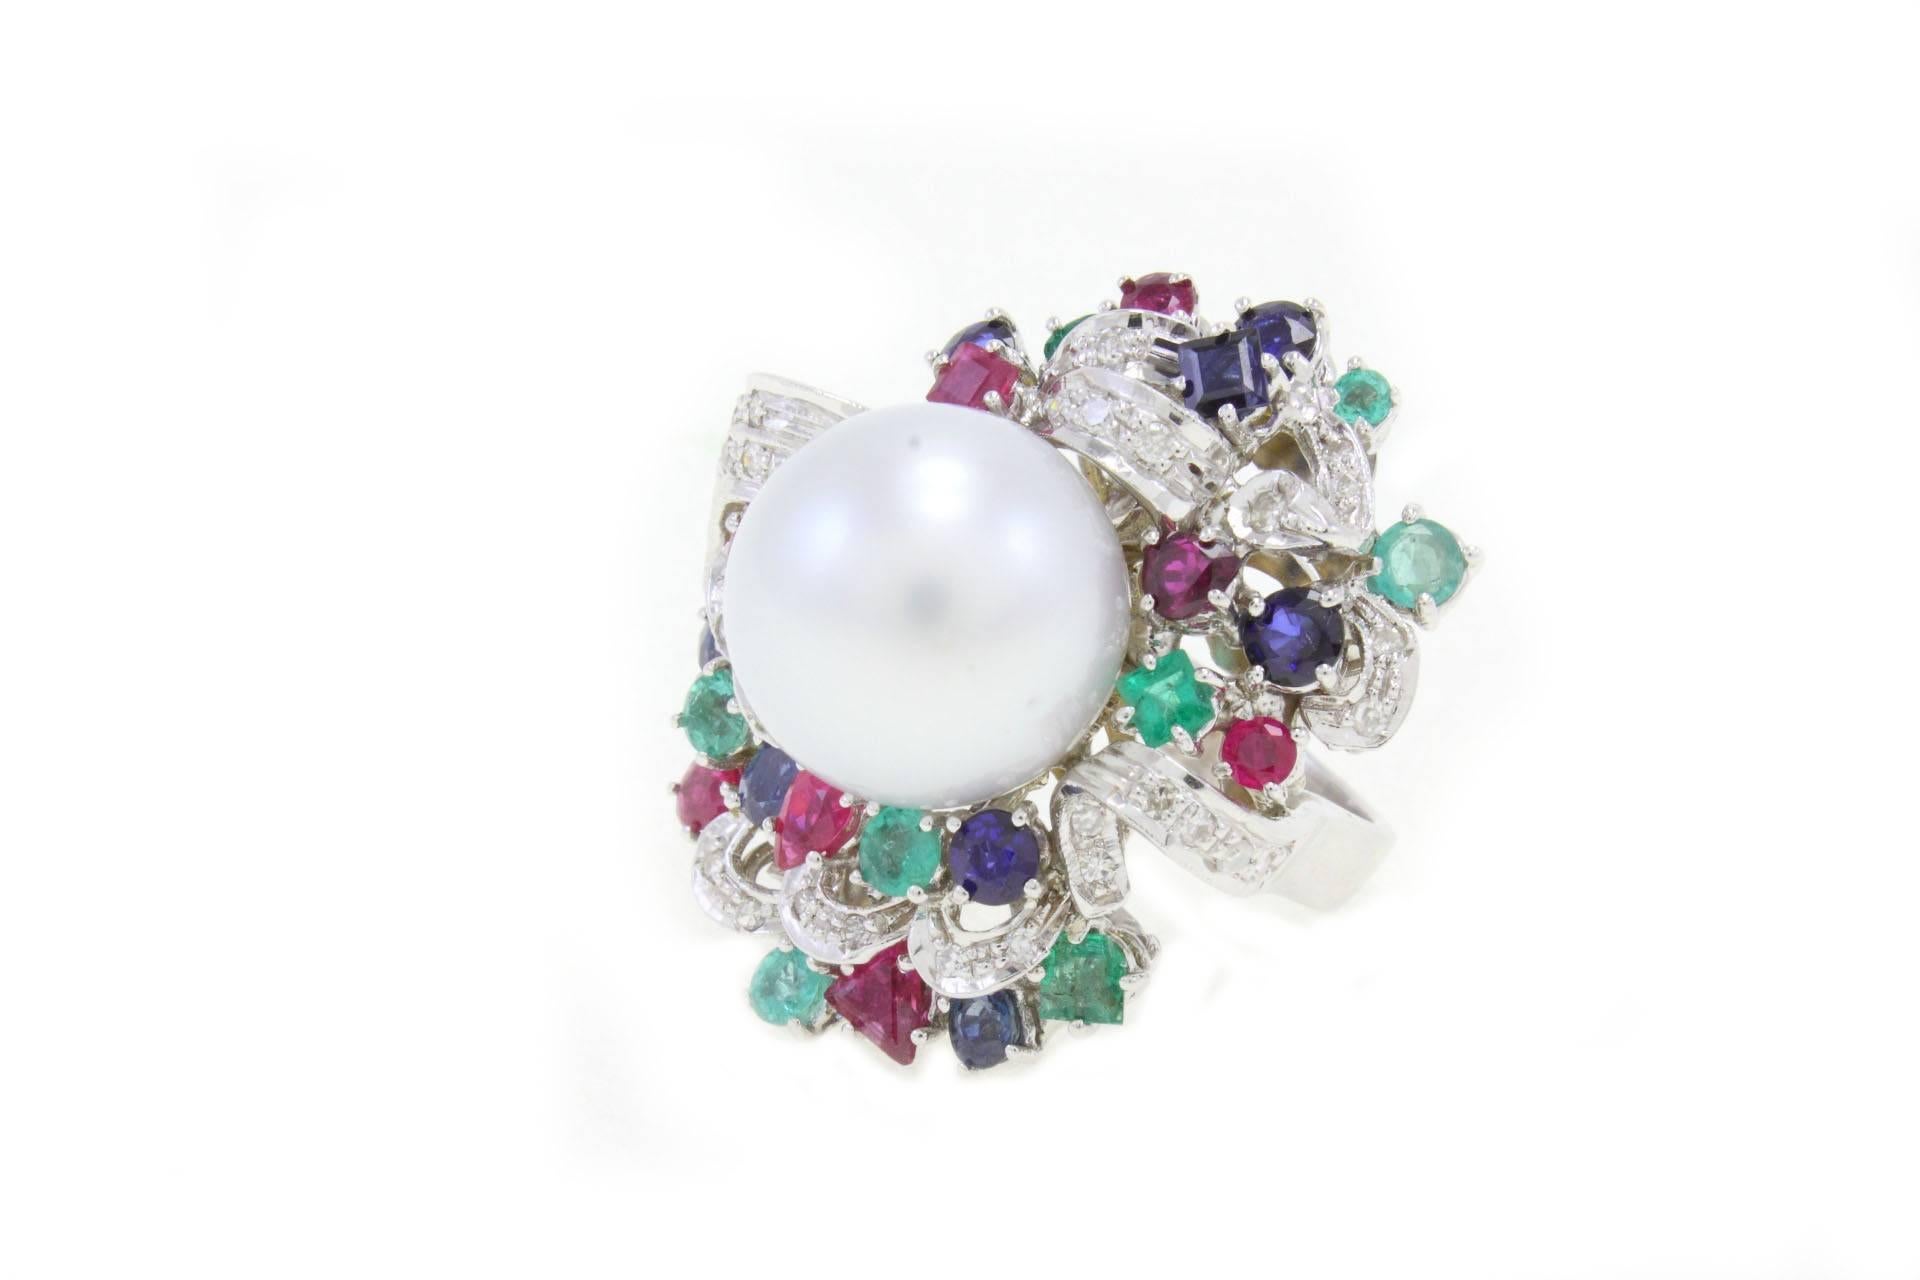 Shiny ring in 14 Kt white gold composed of a central Australian  pearl surrounded by diamonds, emeralds, blue sapphires and rubies.

Diamonds 0.71 kt
gems 4.97 Kt  
Pearl 4.25gr
US Size                                 
Width 1.10 inch               